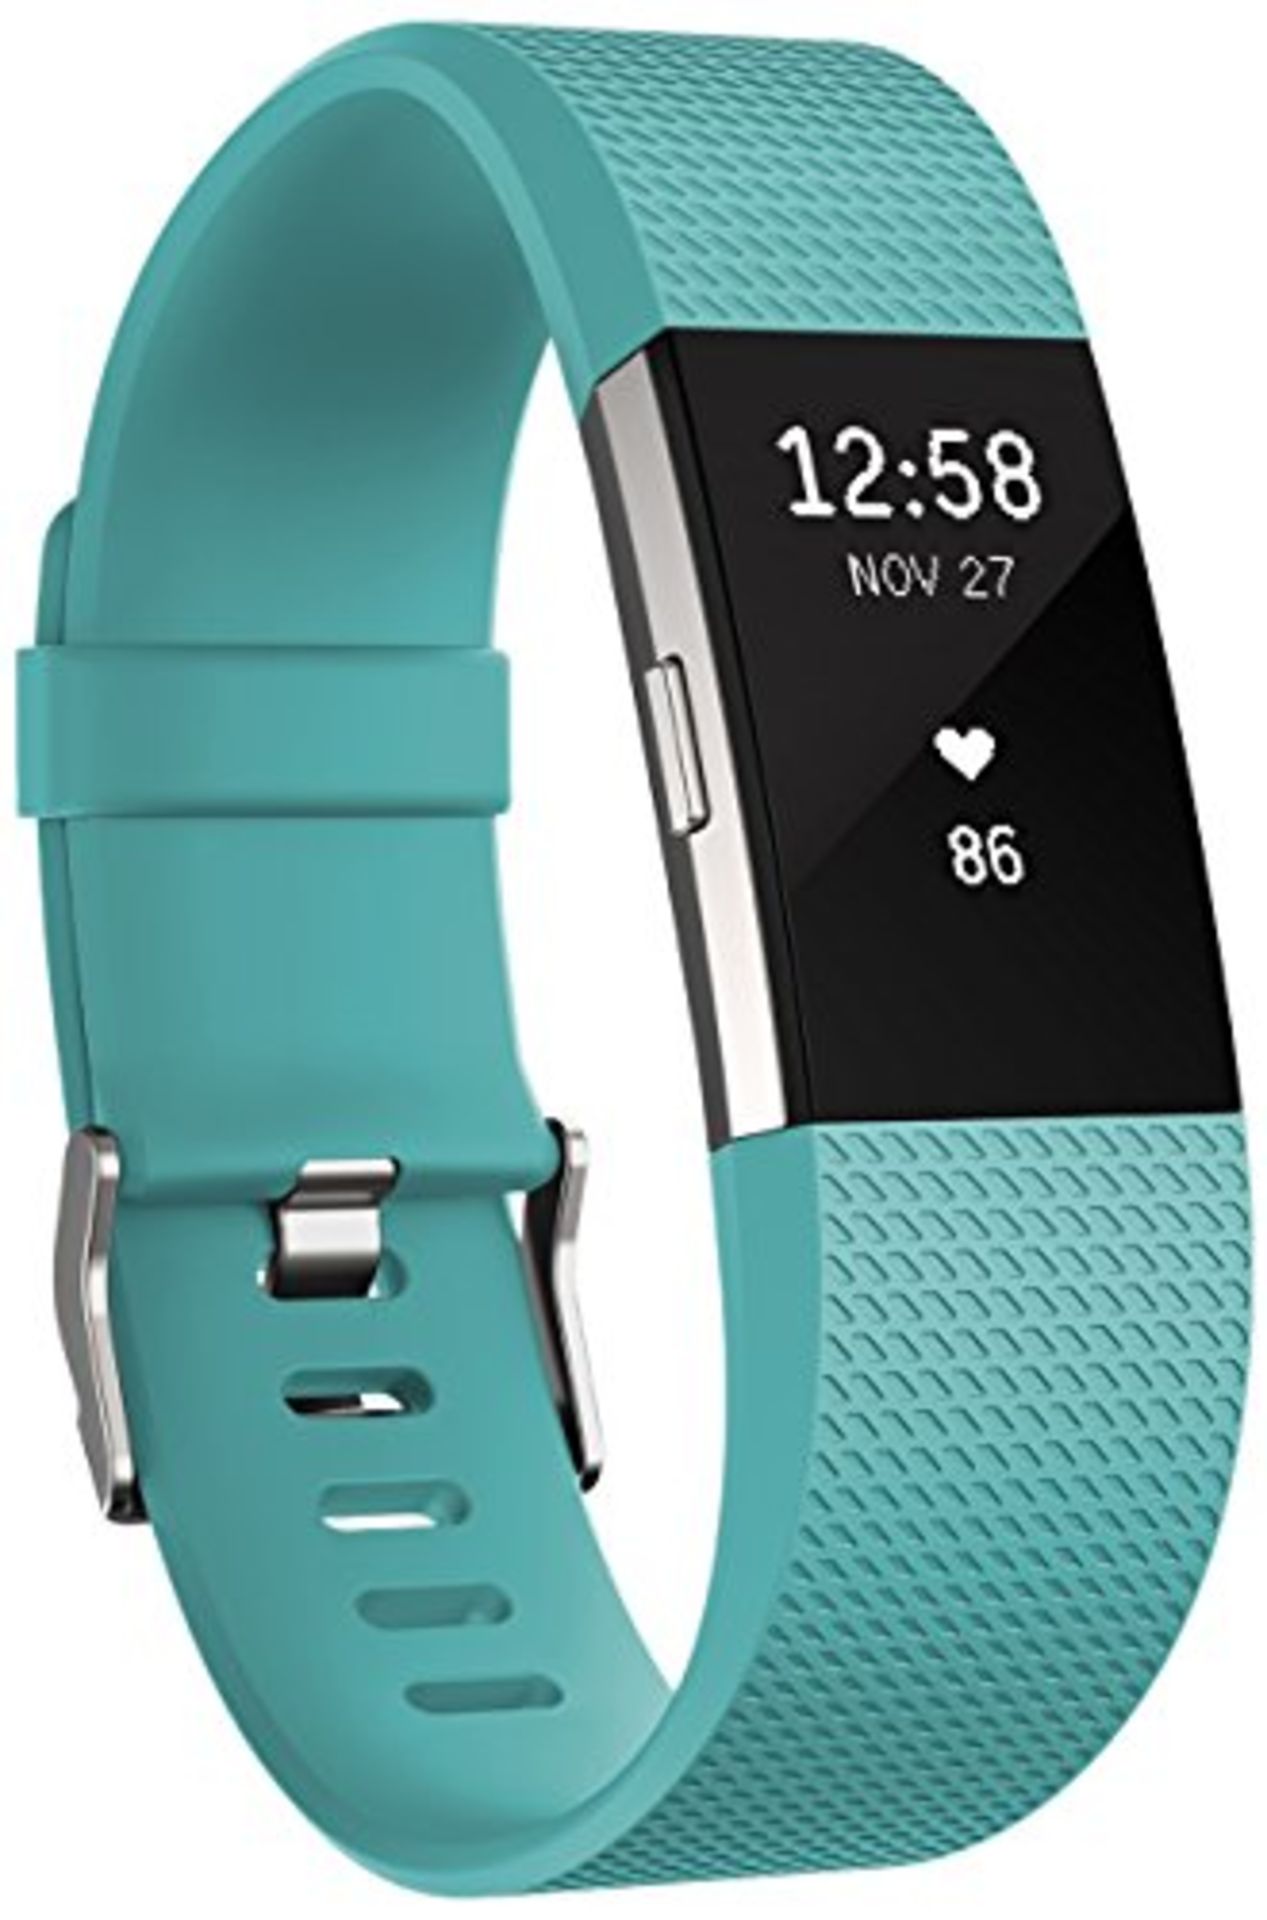 RRP £115.00 [CRACKED] Fitbit Charge 2 Activity Tracker with Wrist Based Heart Rate Monitor - Teal